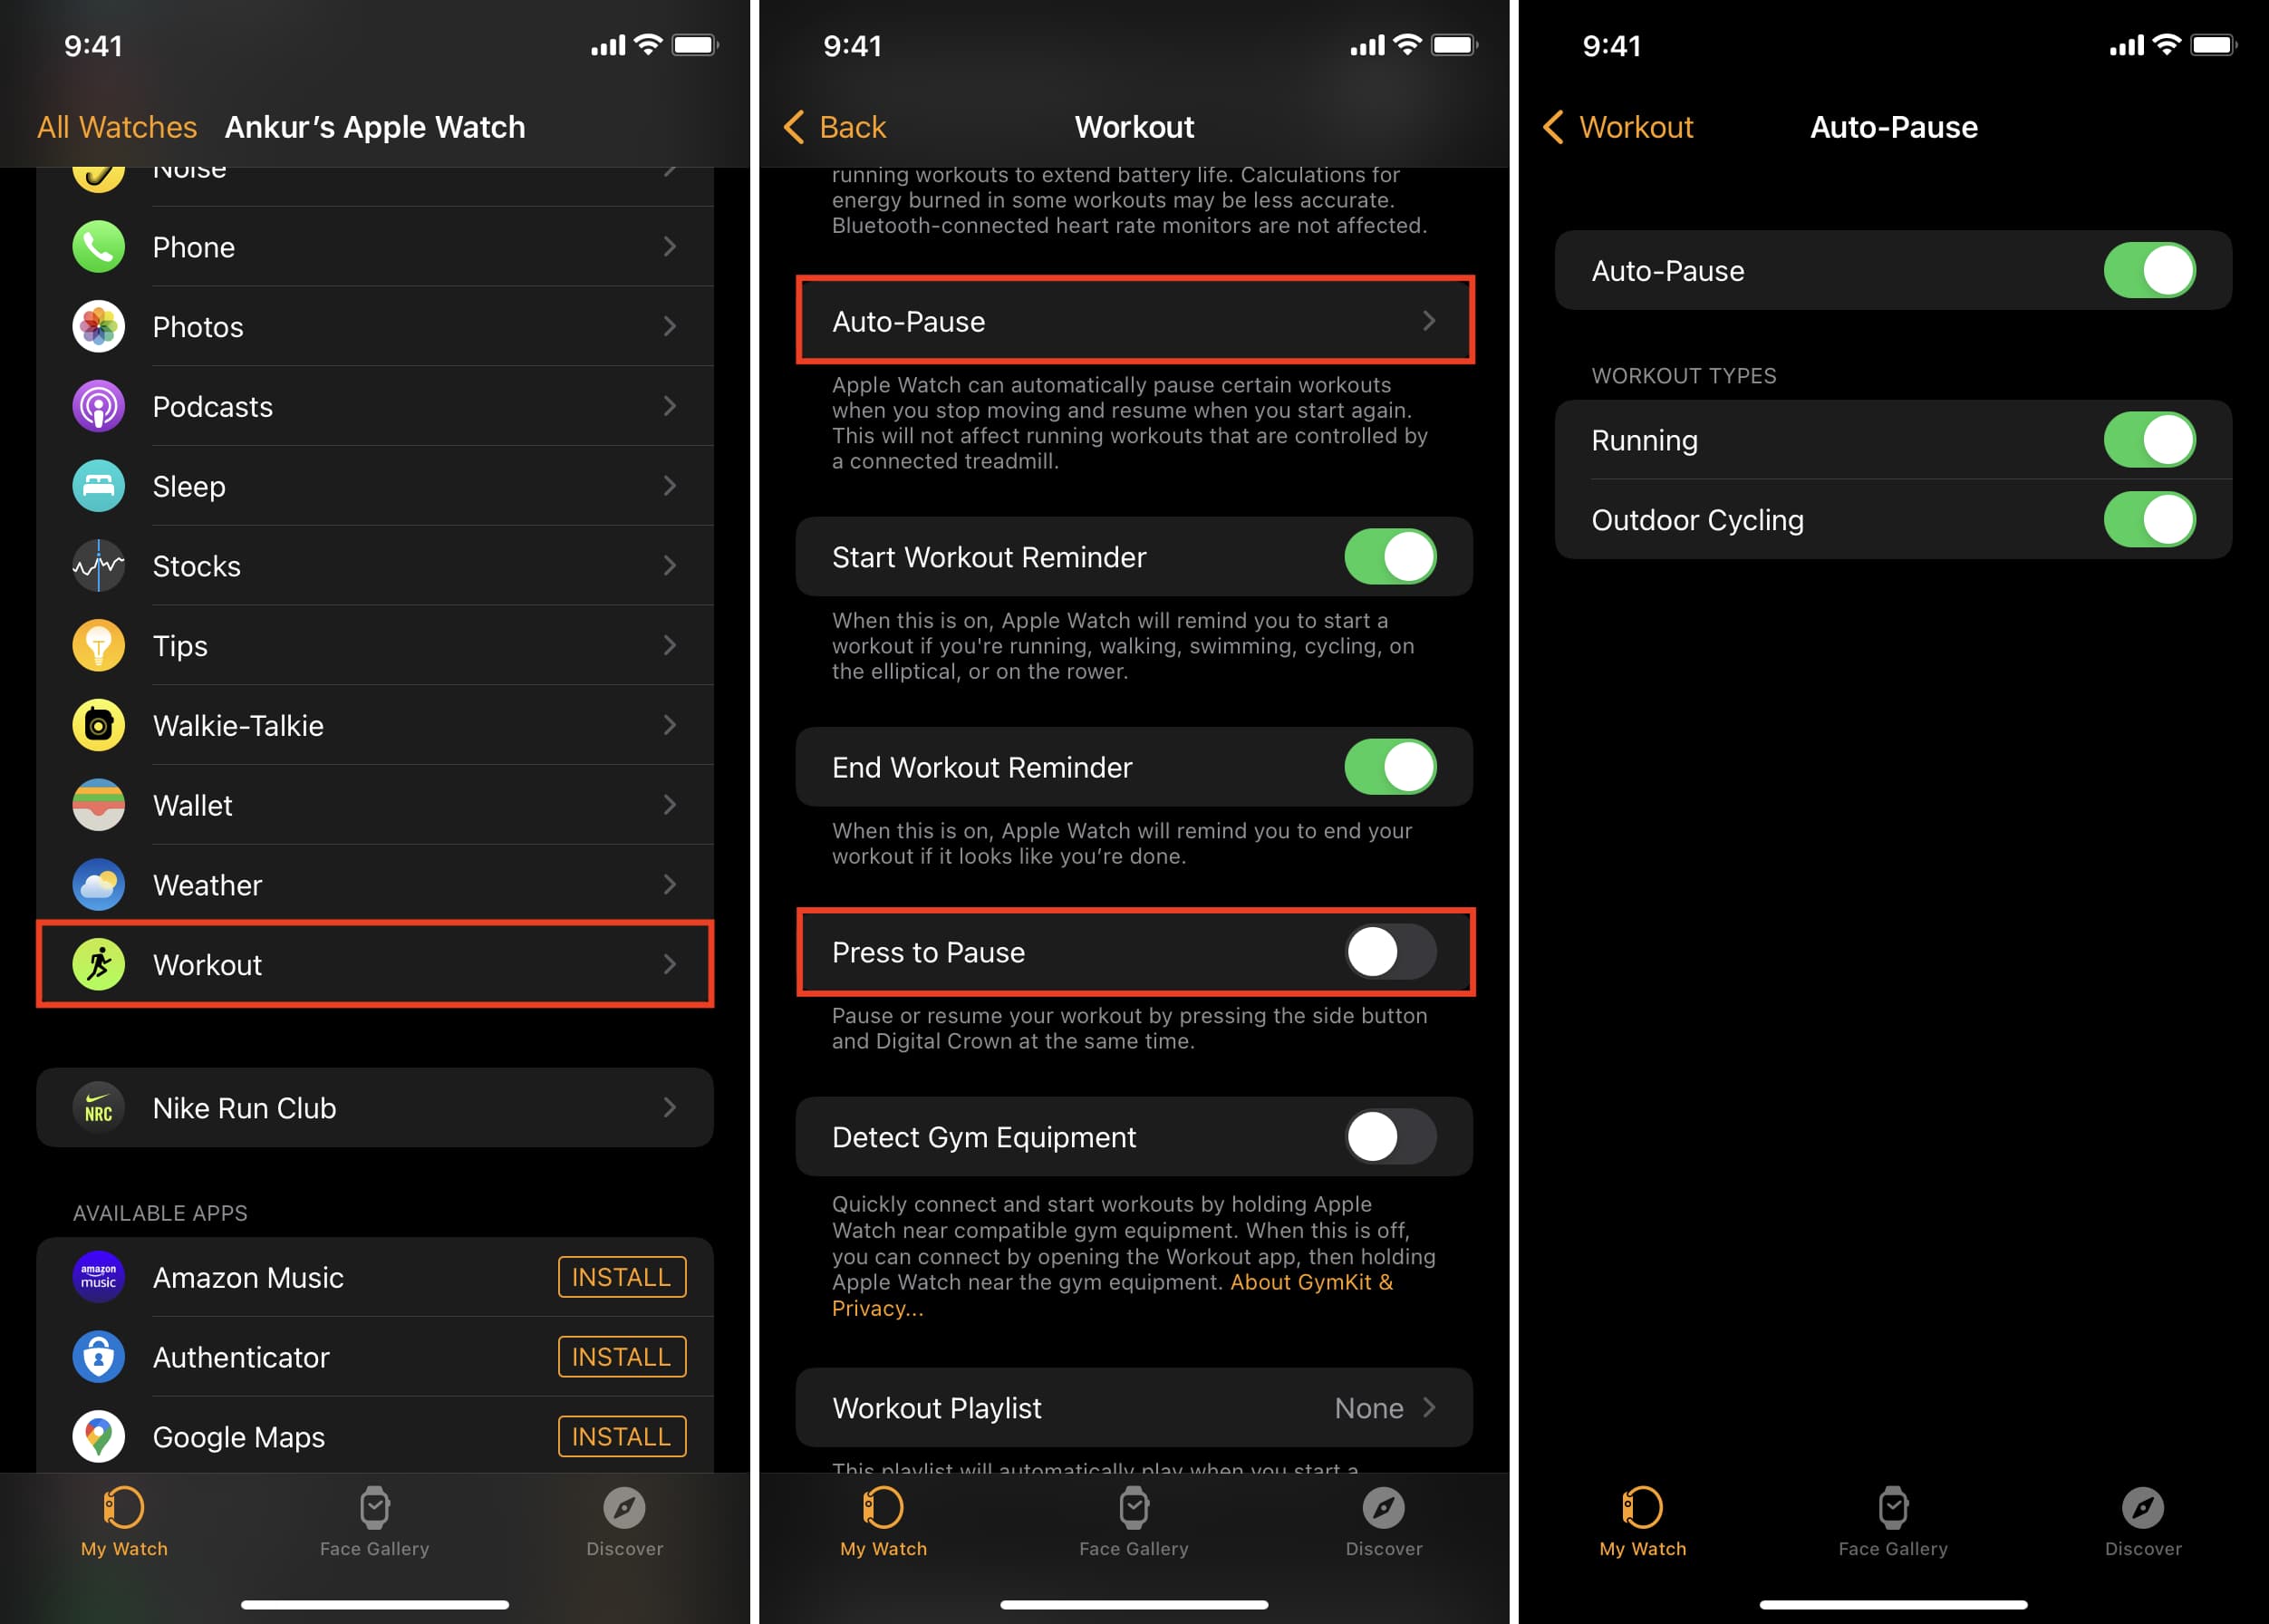 Auto-Pause and Press to Pause in Workout Settings on Apple Watch